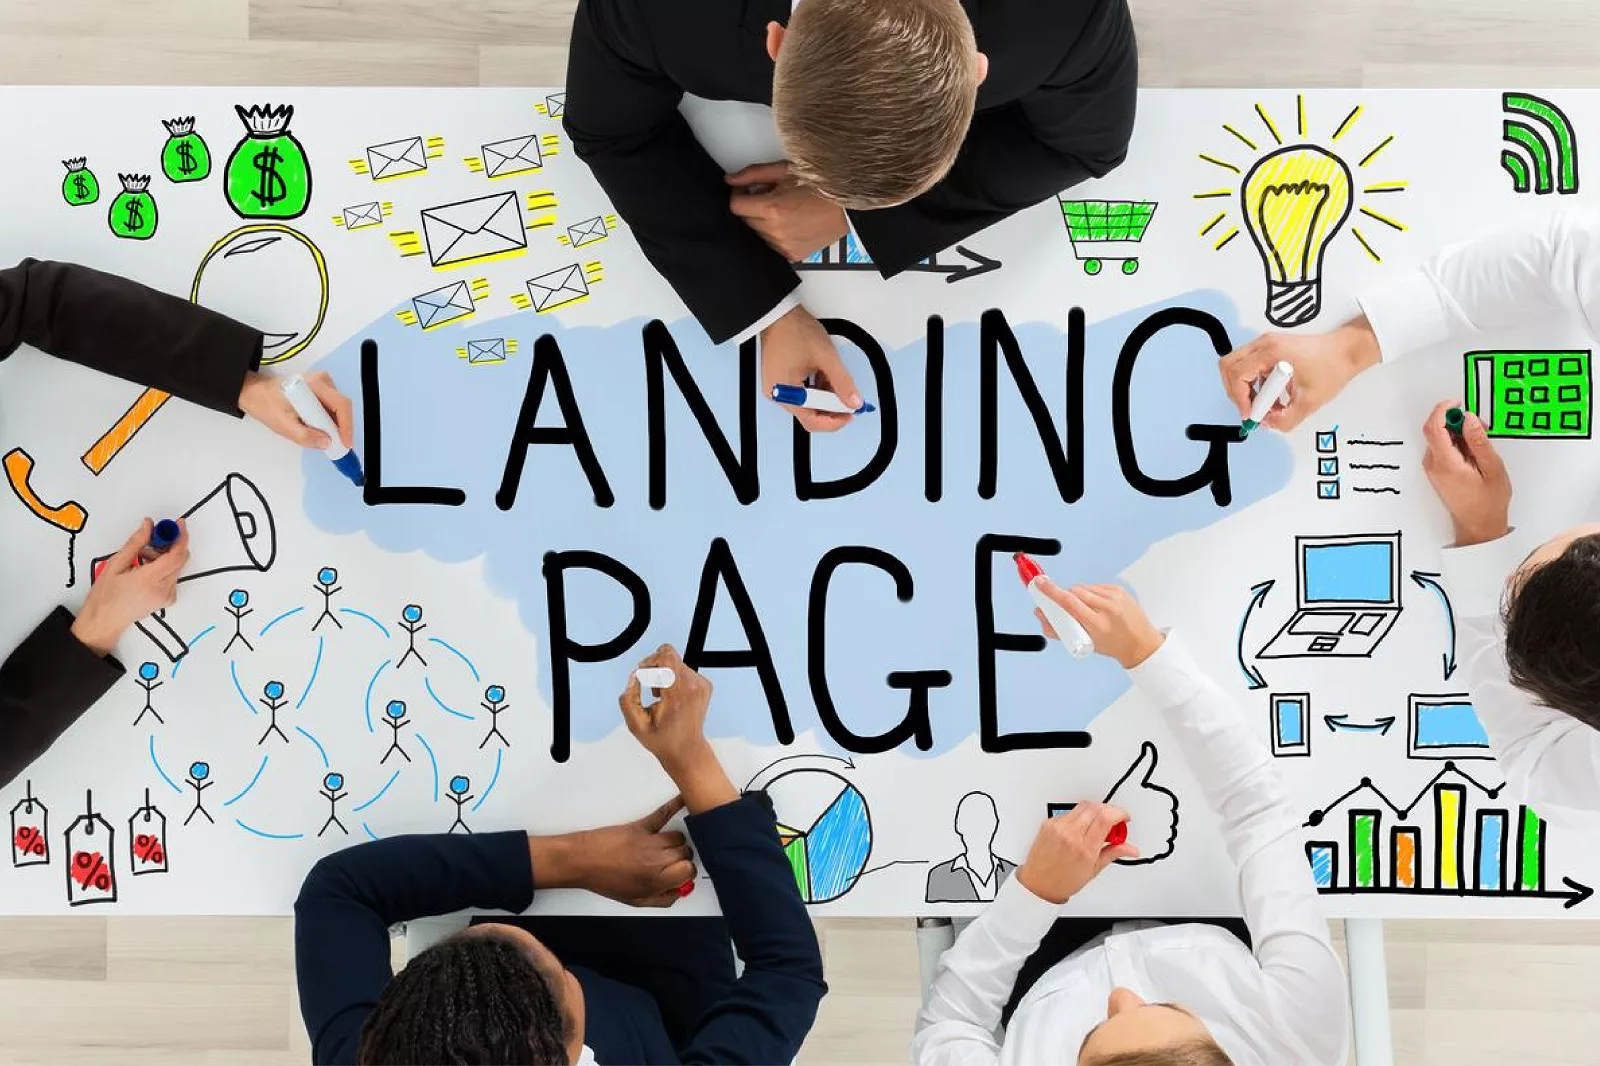 Key elements of a successful landing page